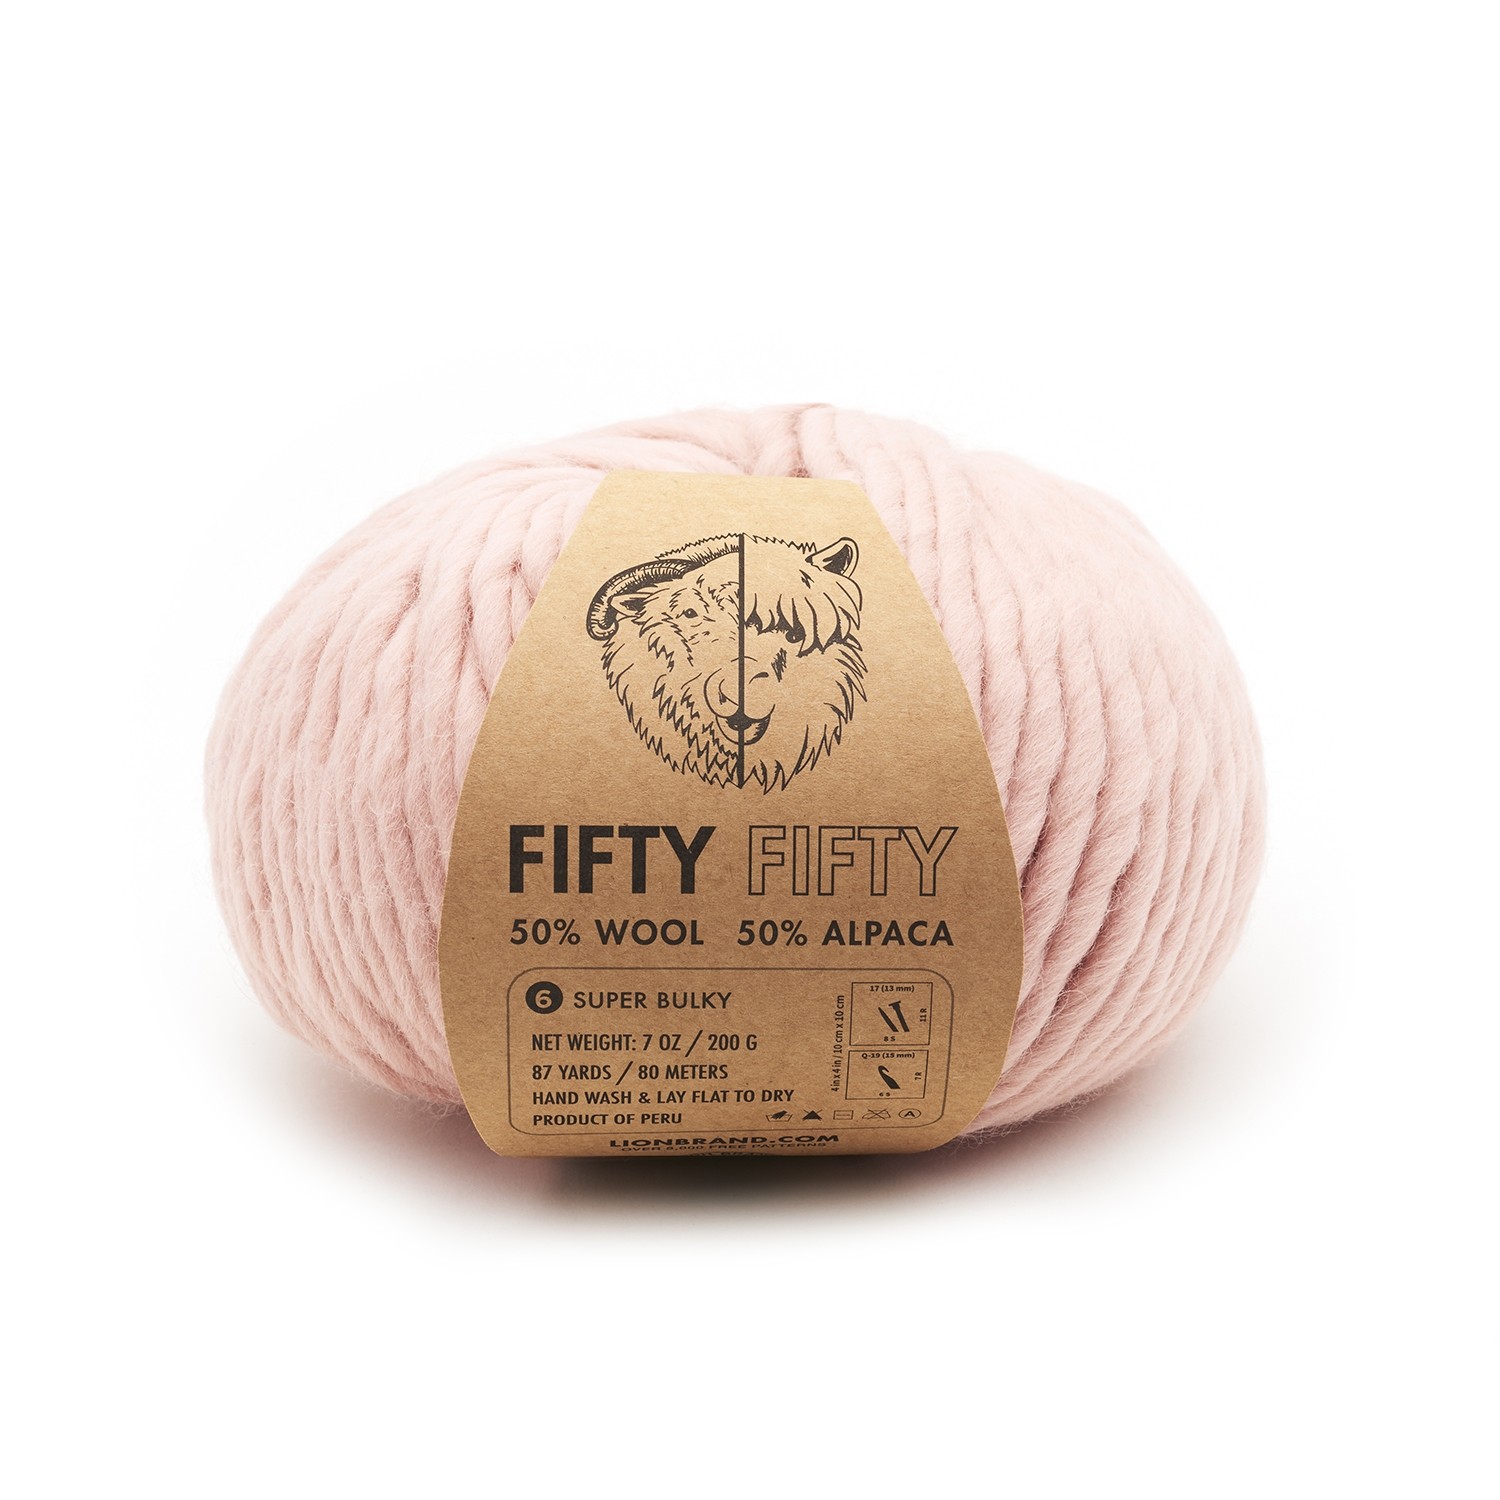 Fifty Fifty Yarn in Pink